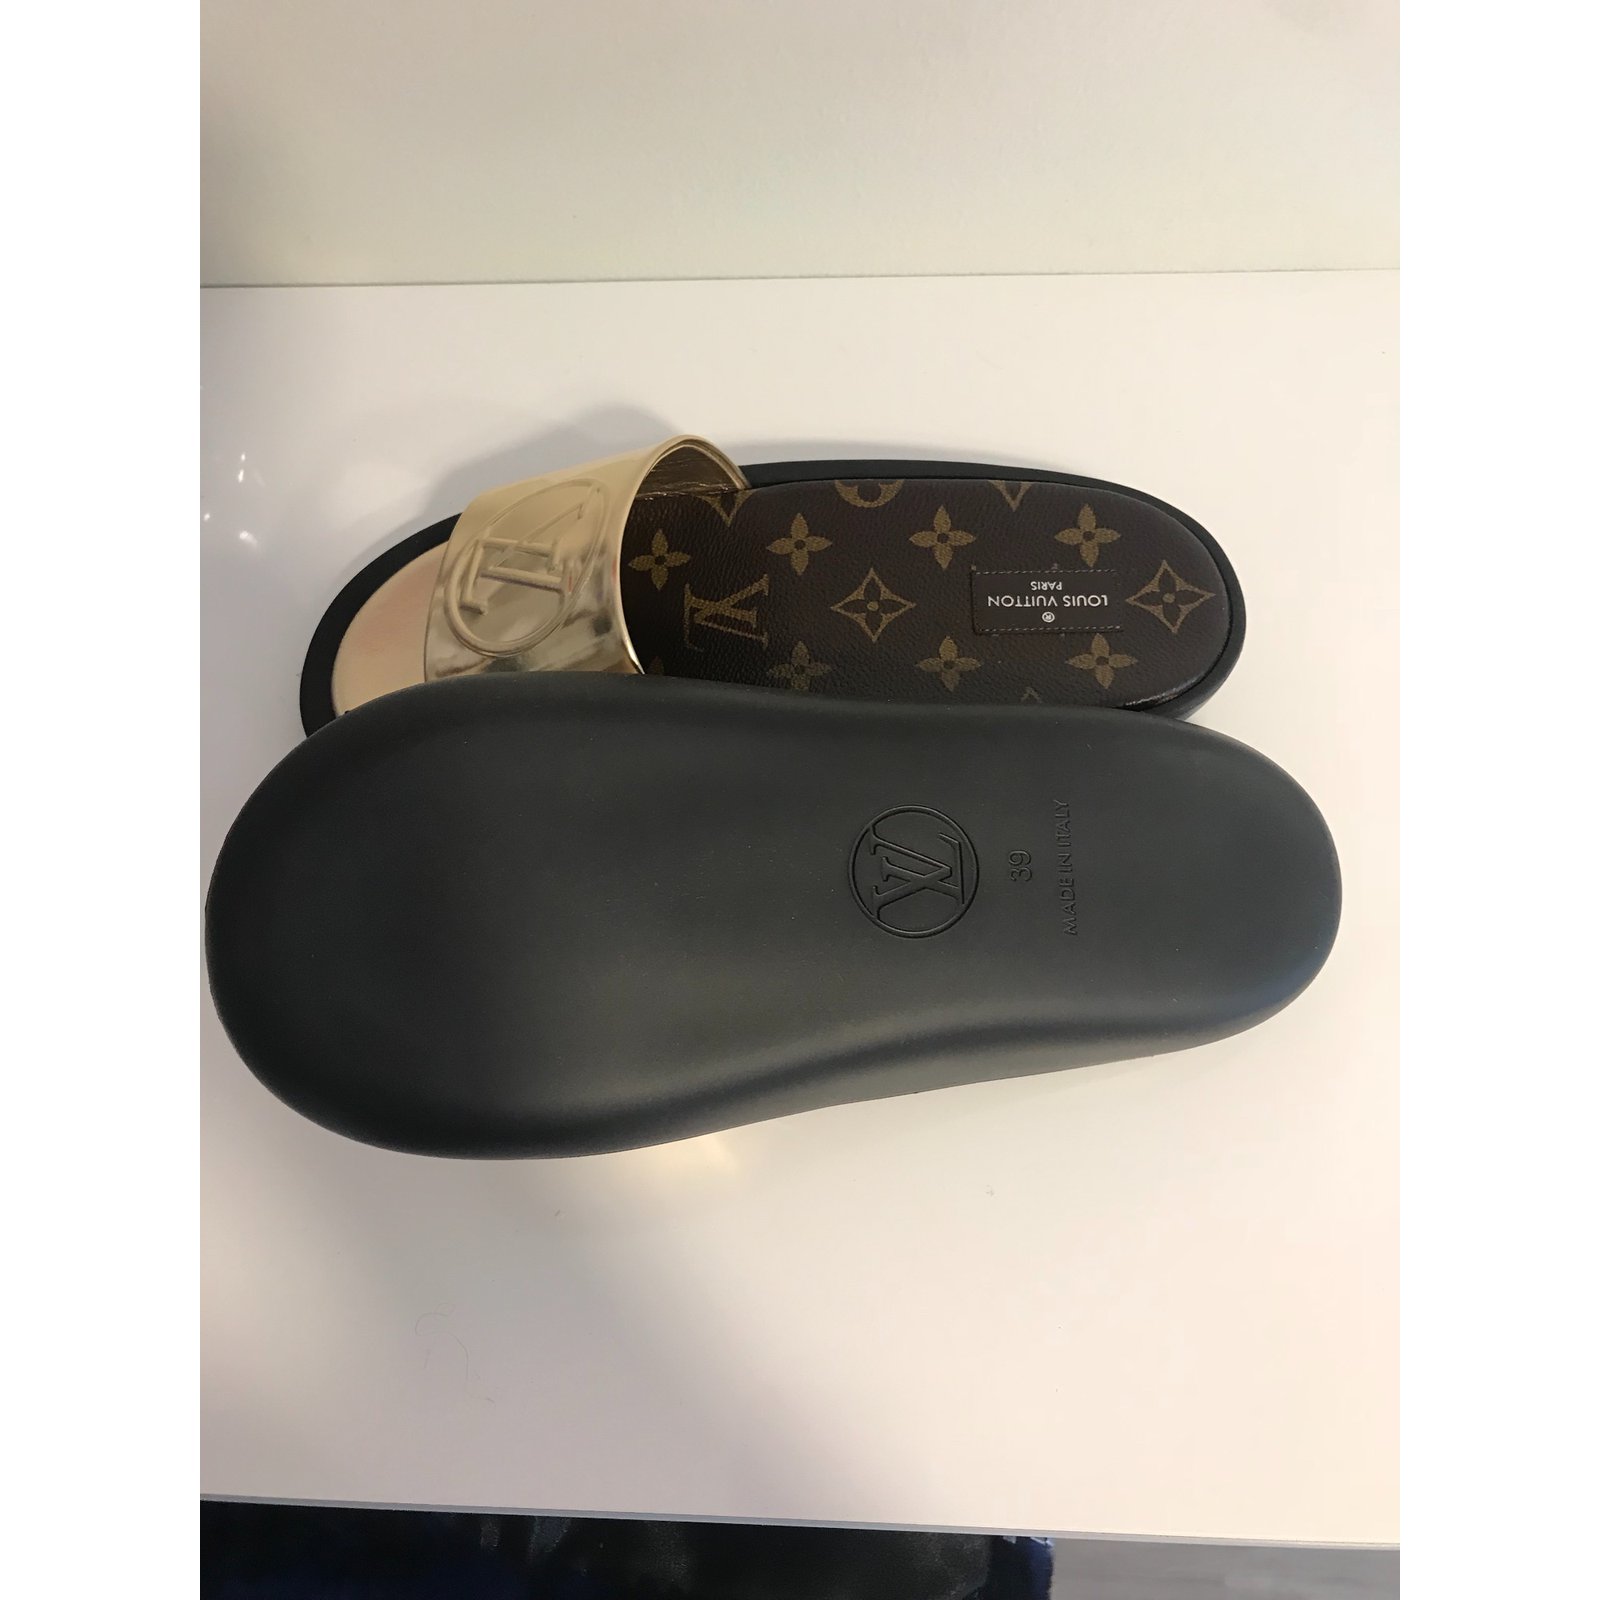 Louis Vuitton Sunbath Flat Mule Sliders Brand New With Box And Dustbags